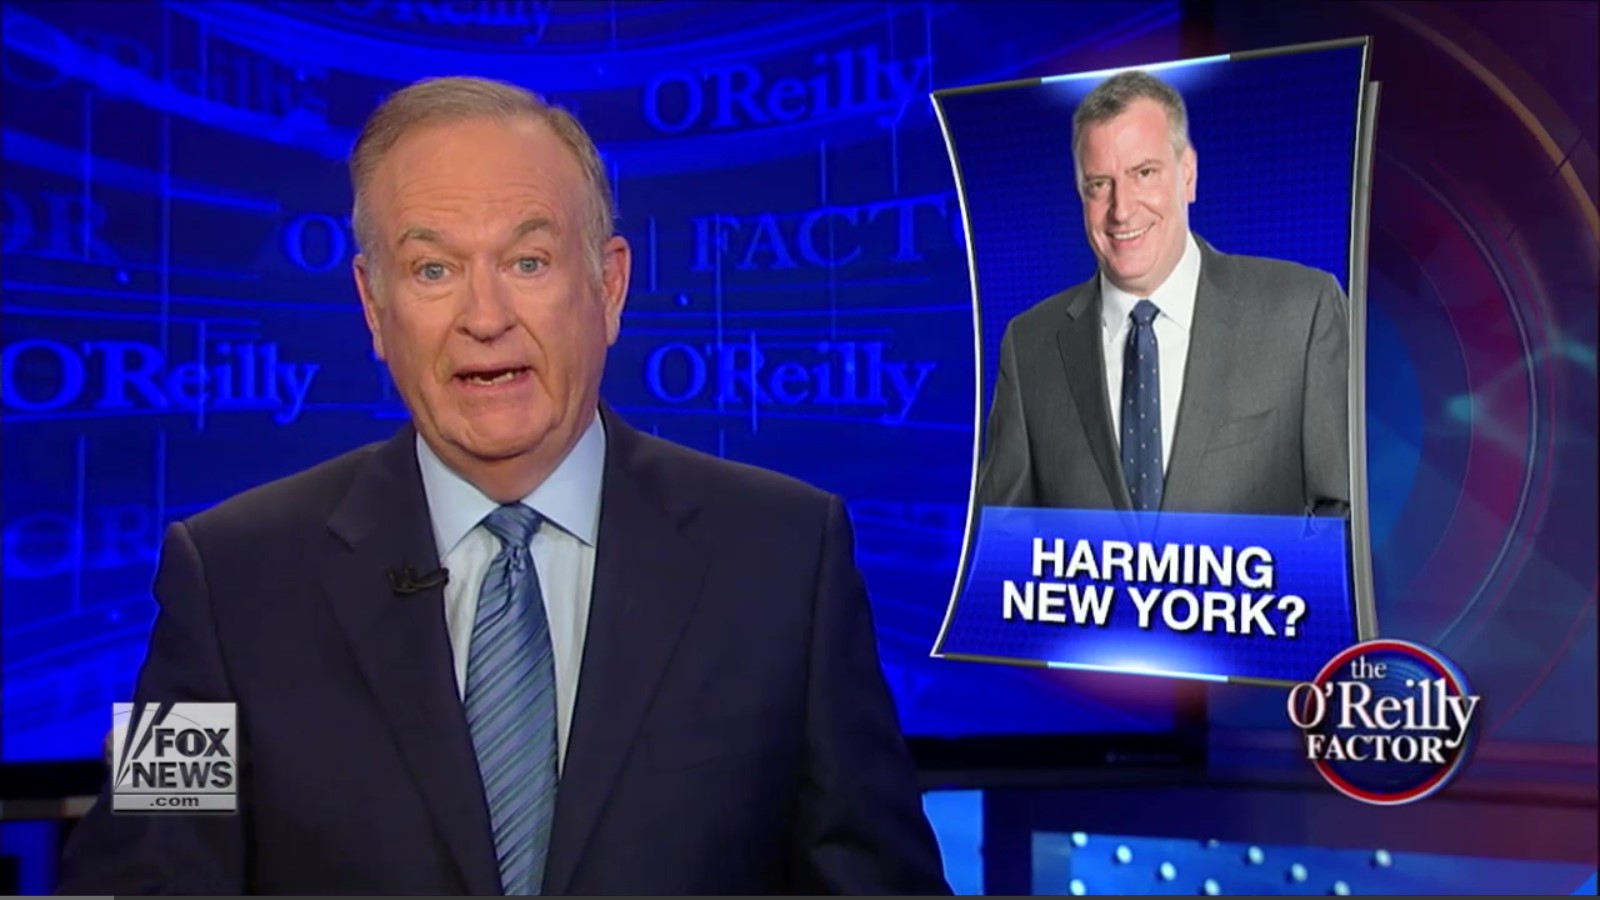 Want Another Reason To Hate Bill O’Reilly? Watch Him Completely Crap On Black Homeless People